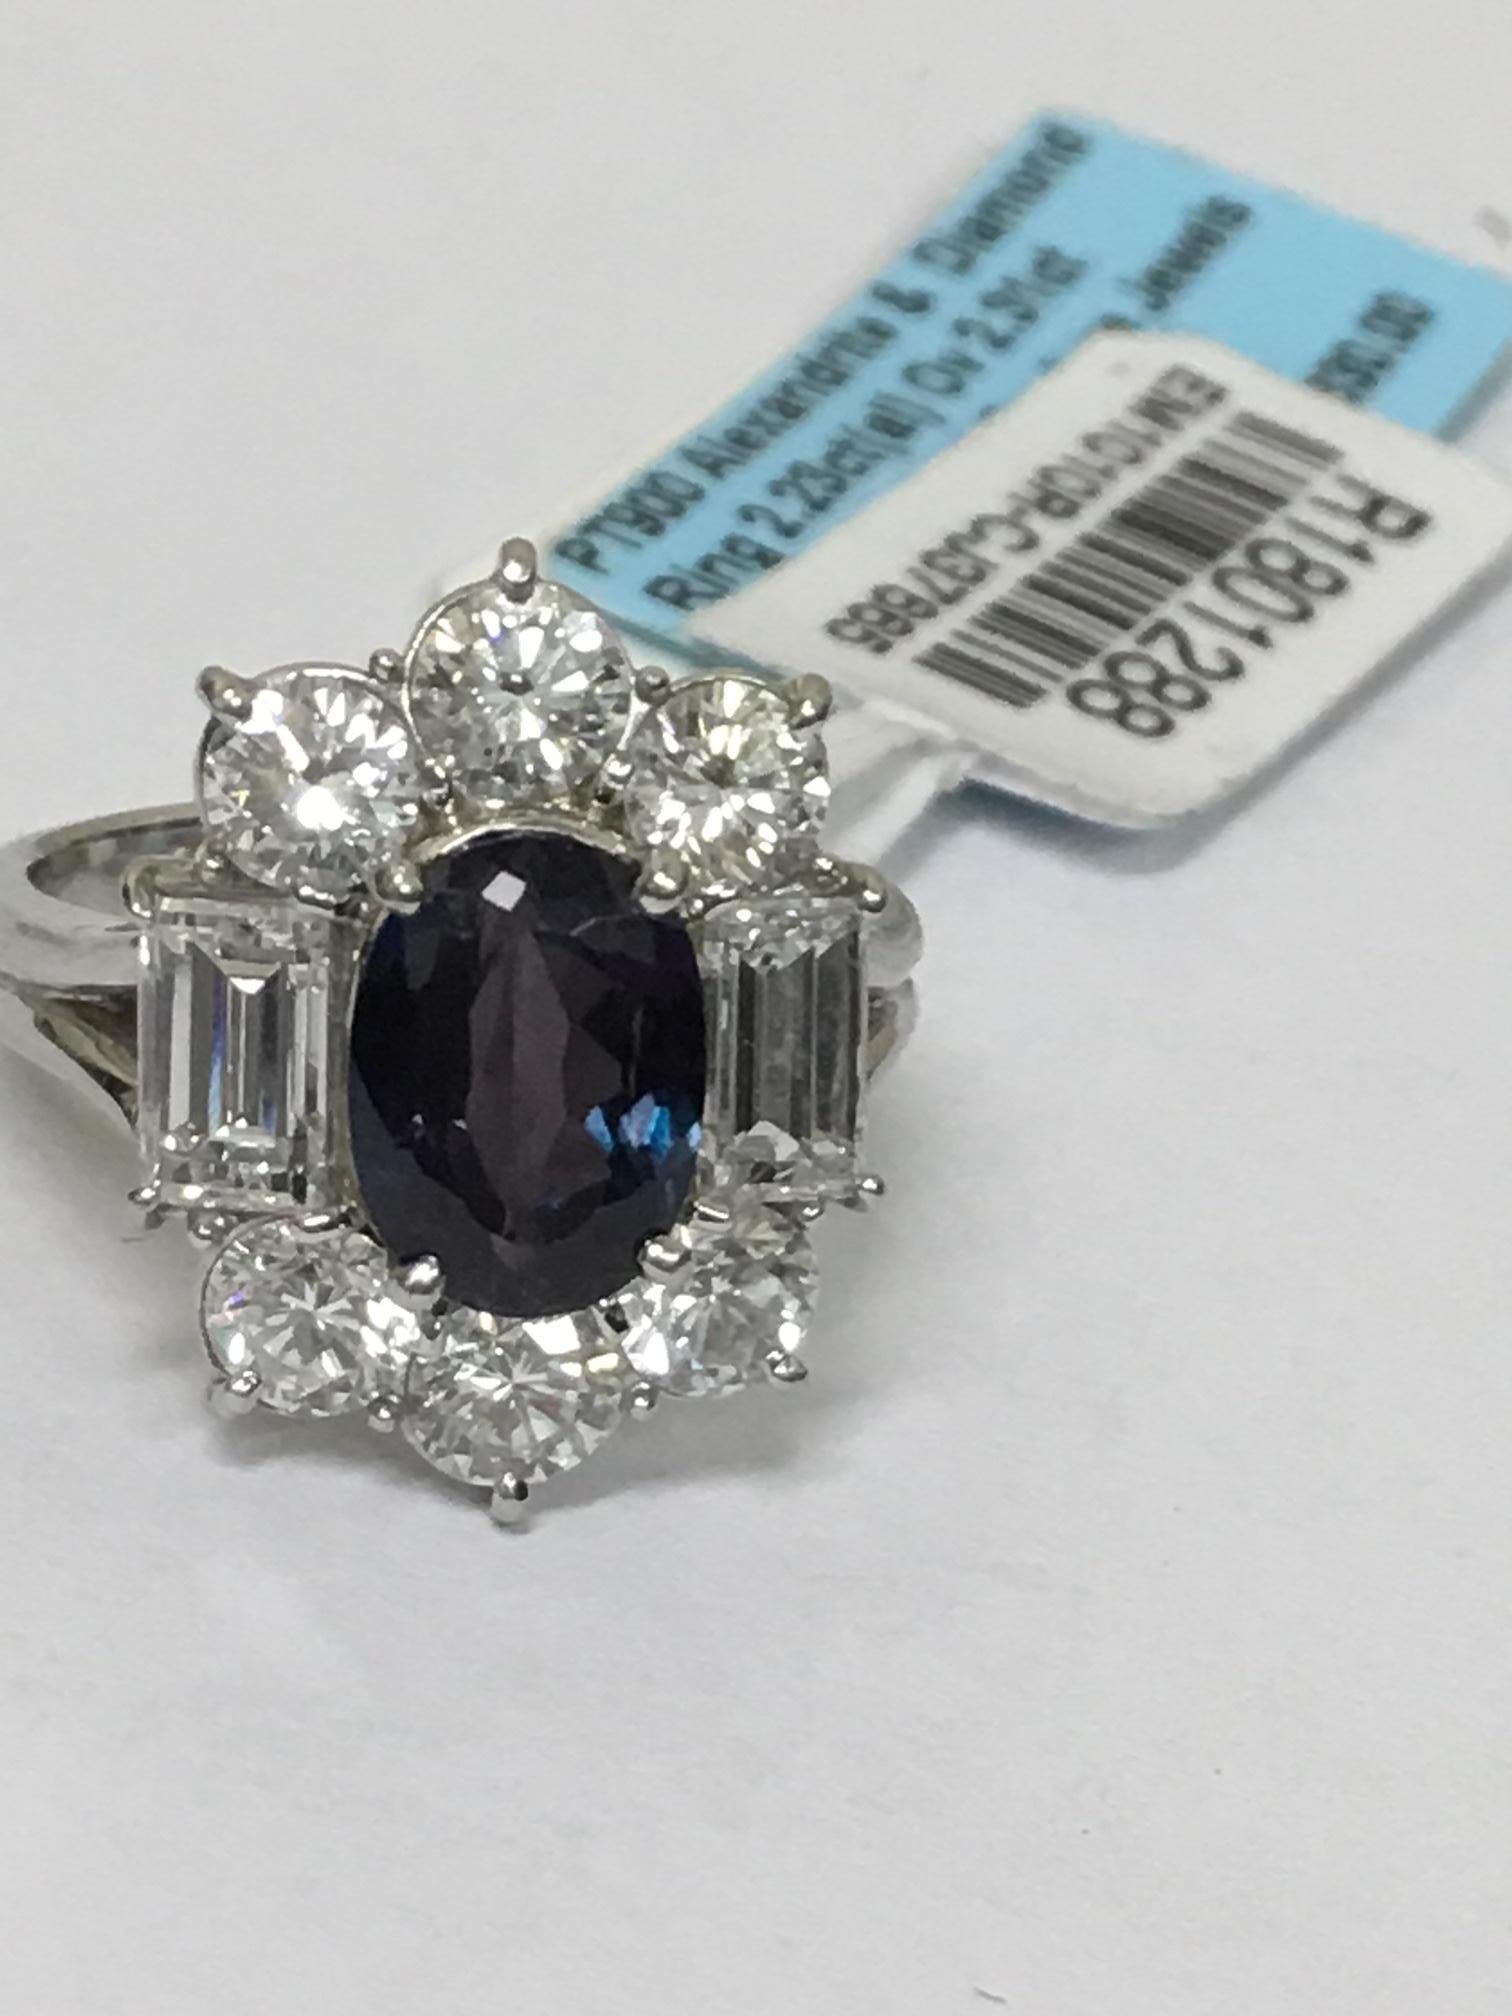 GIA Certified 2.23 Carat Alexandrite and 2.31 Carat color less diamonds set in Platinum .The ring it self is GIA Certified.
One of a kind very good color change Alexandrite.
Size of the ring is 6 but can be resized.
